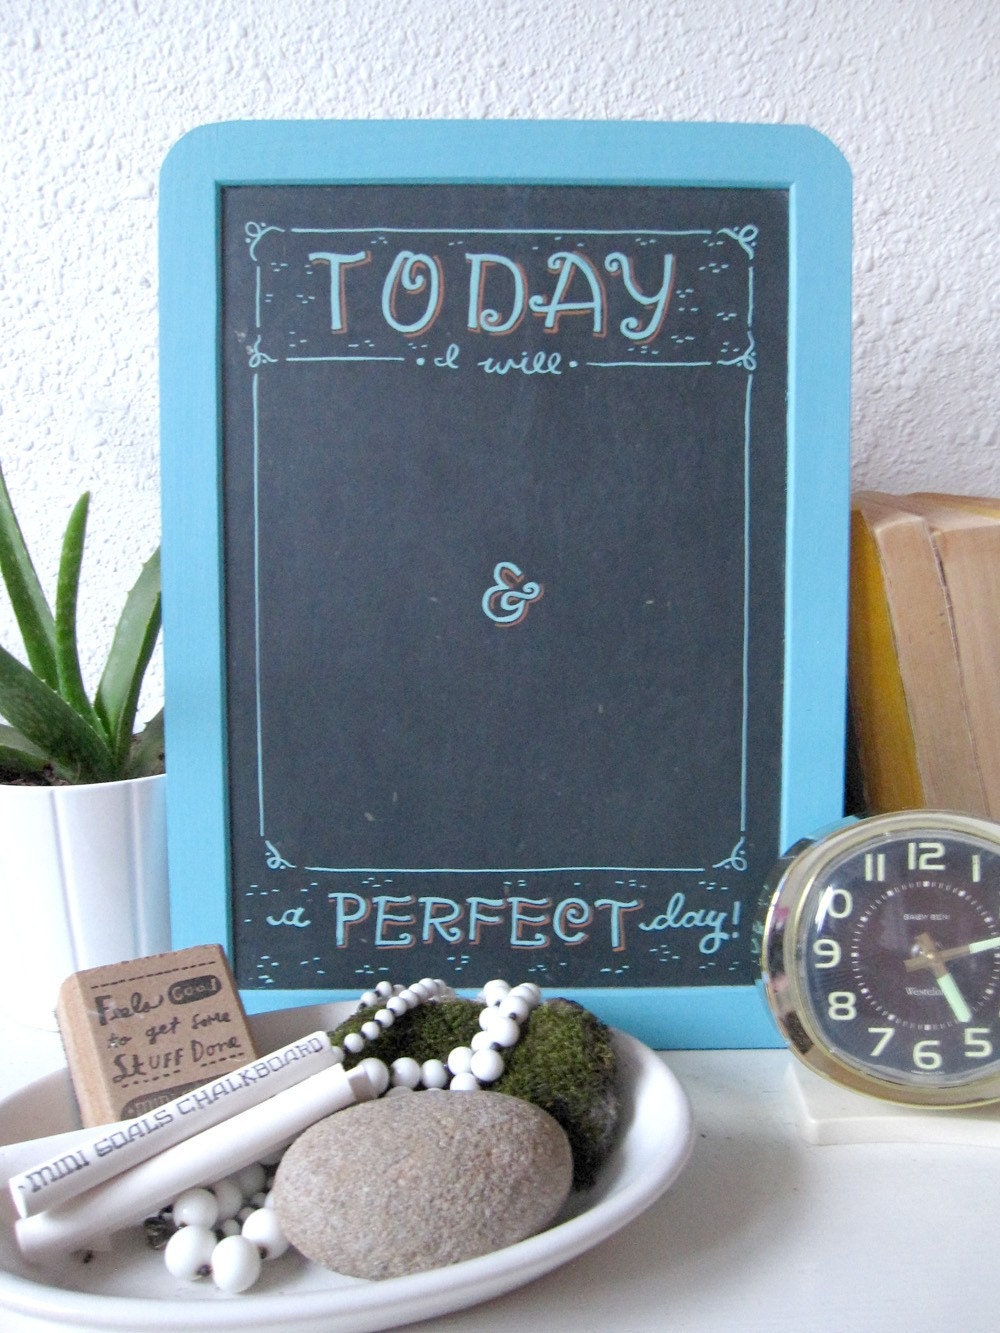 Mini Goals Chalkboards - A Perfect Day - Clear Sky/Spicey